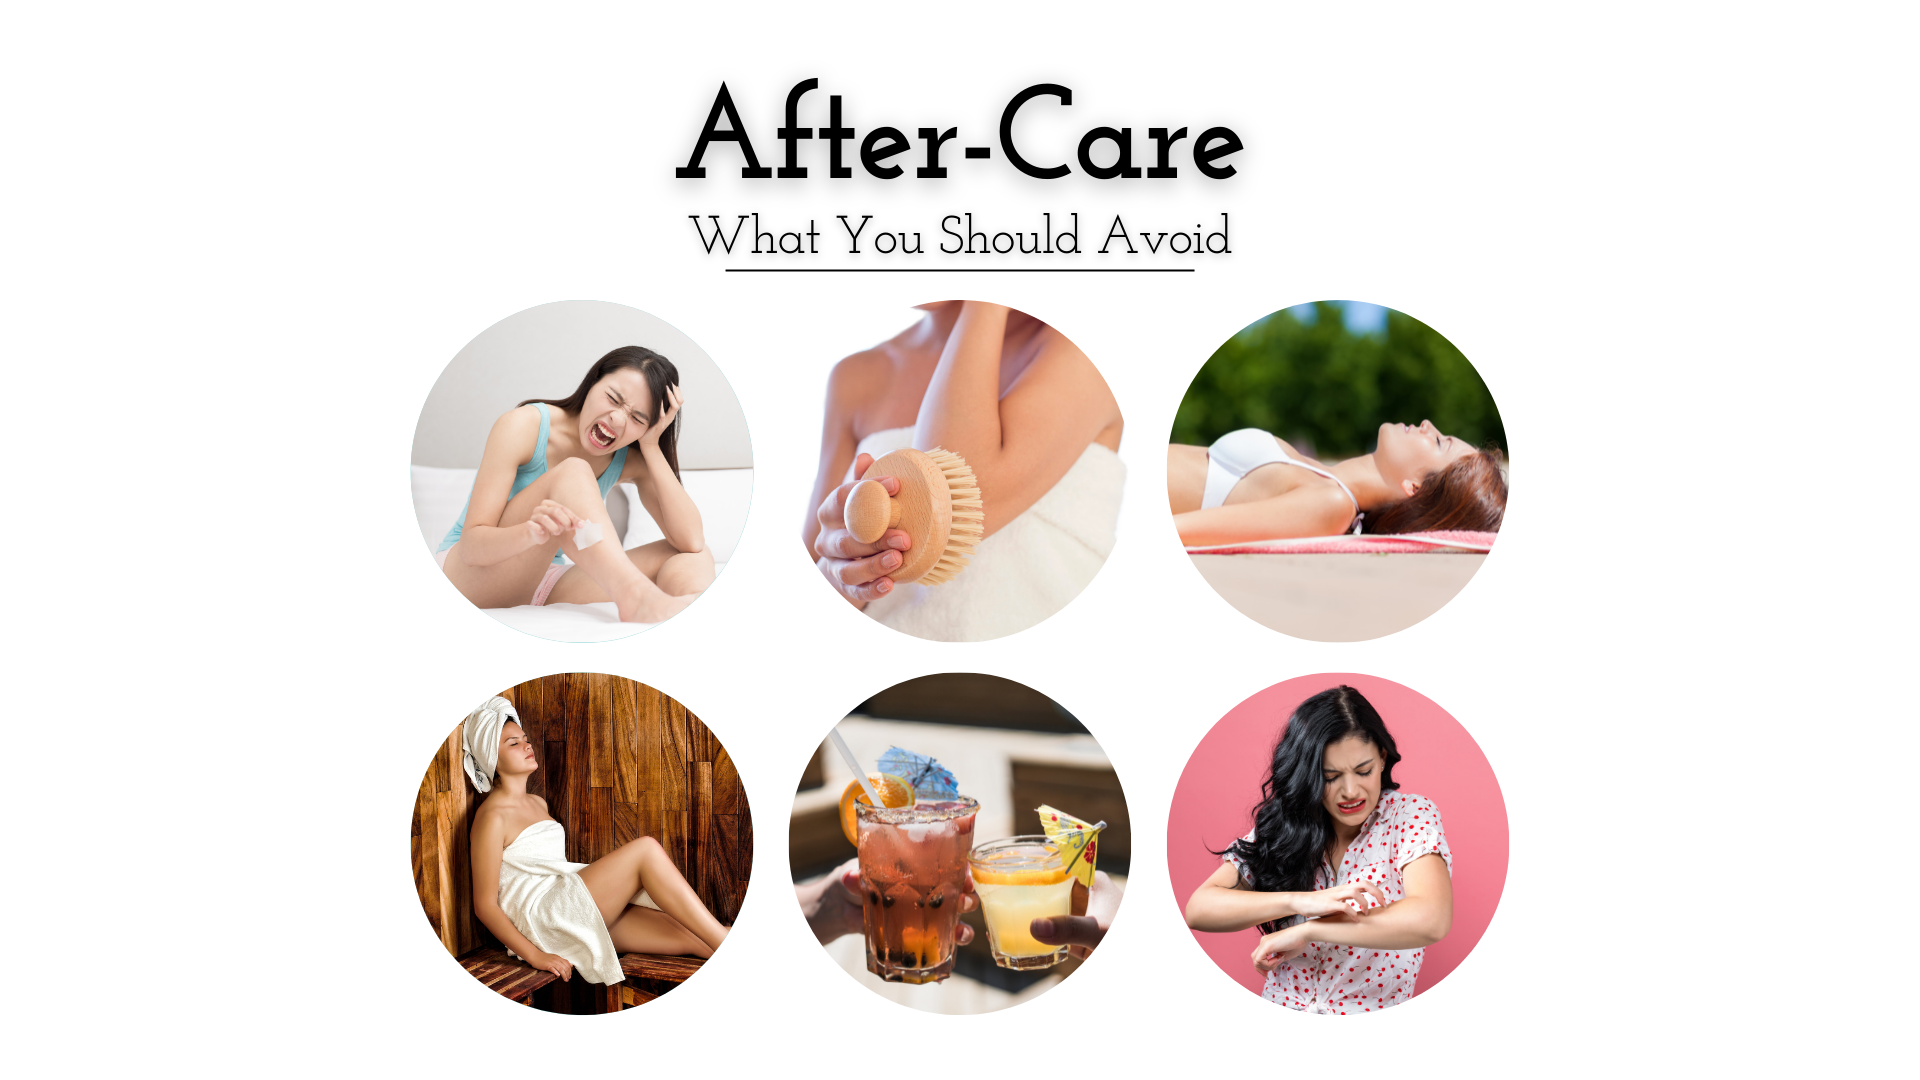 Aftercare: What to Do